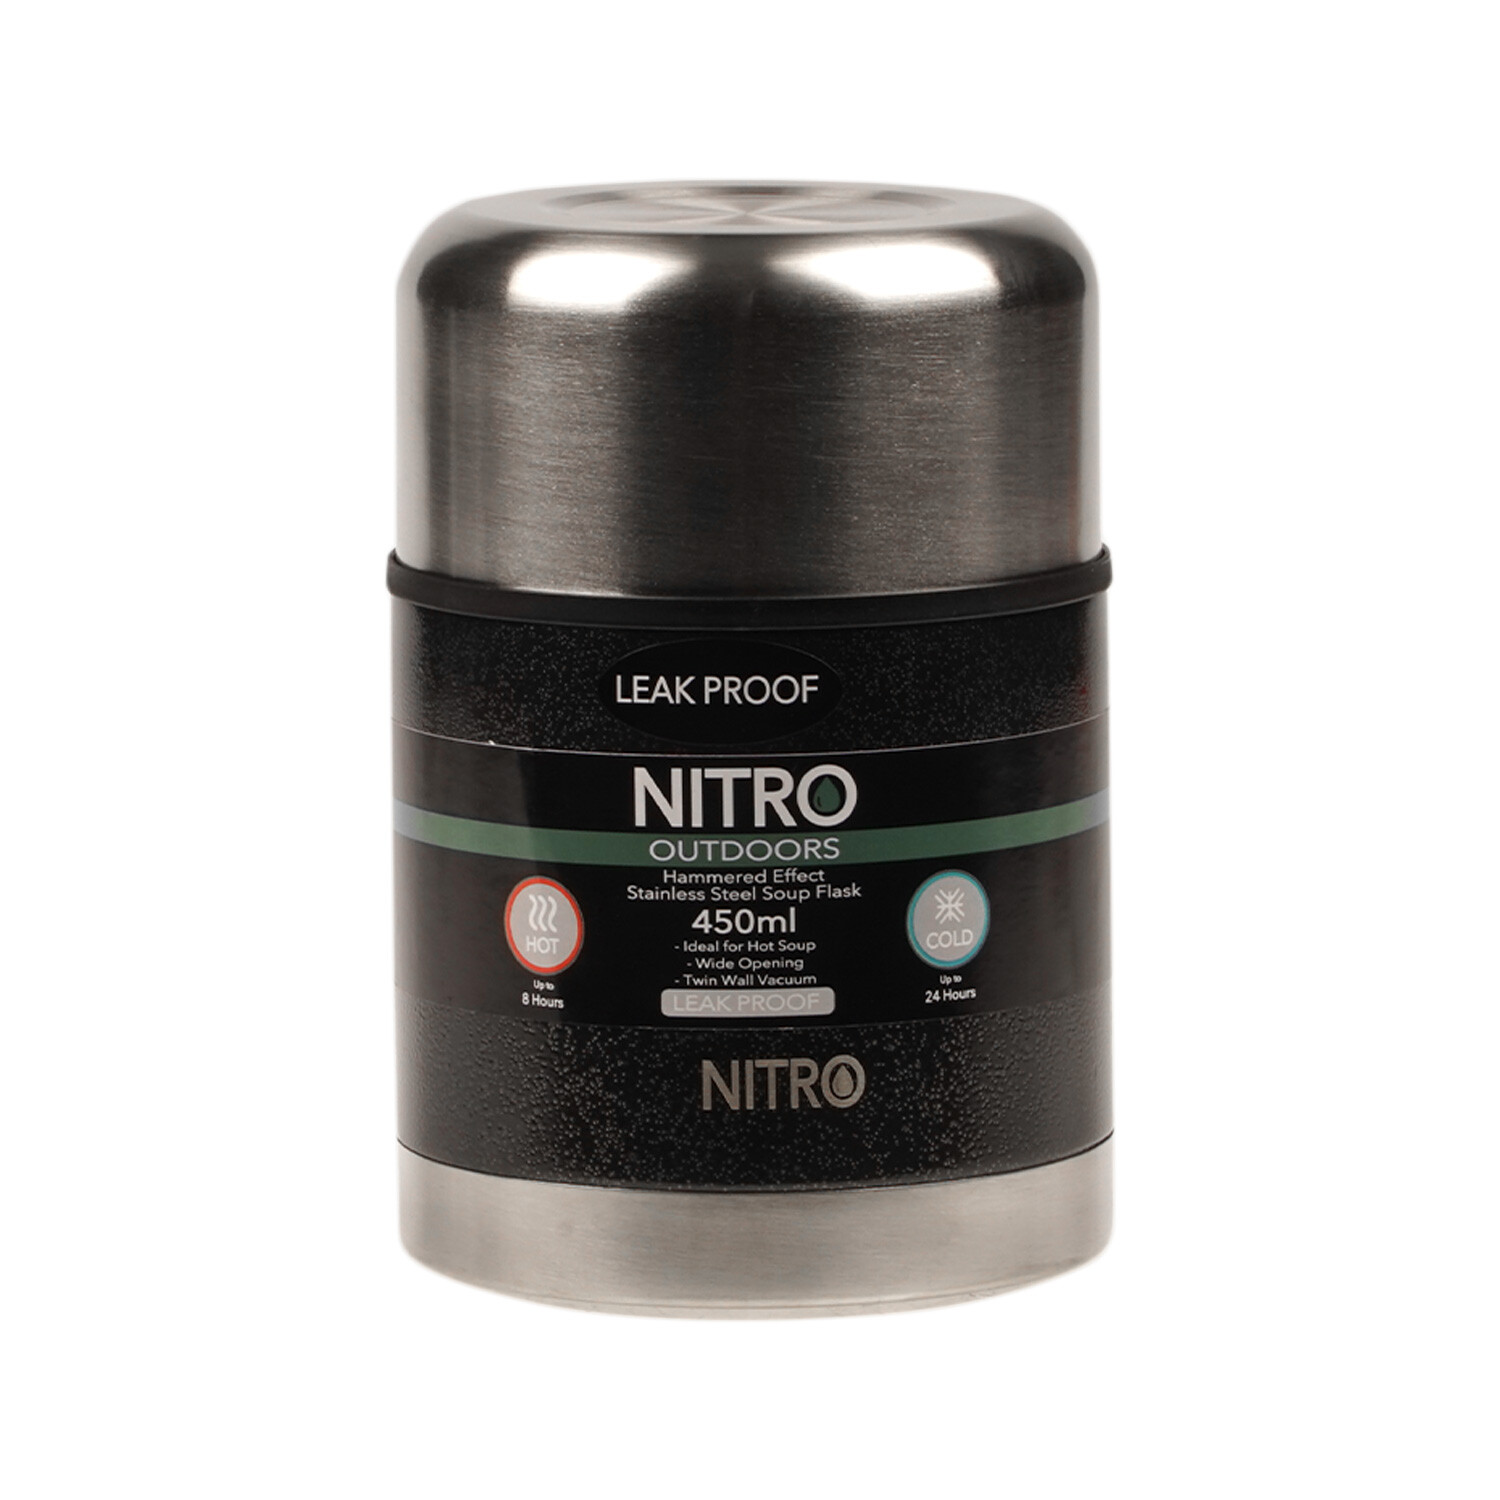 Nitro Hammered Stainless Steel Soup Vacuum Flask 450ml Image 1